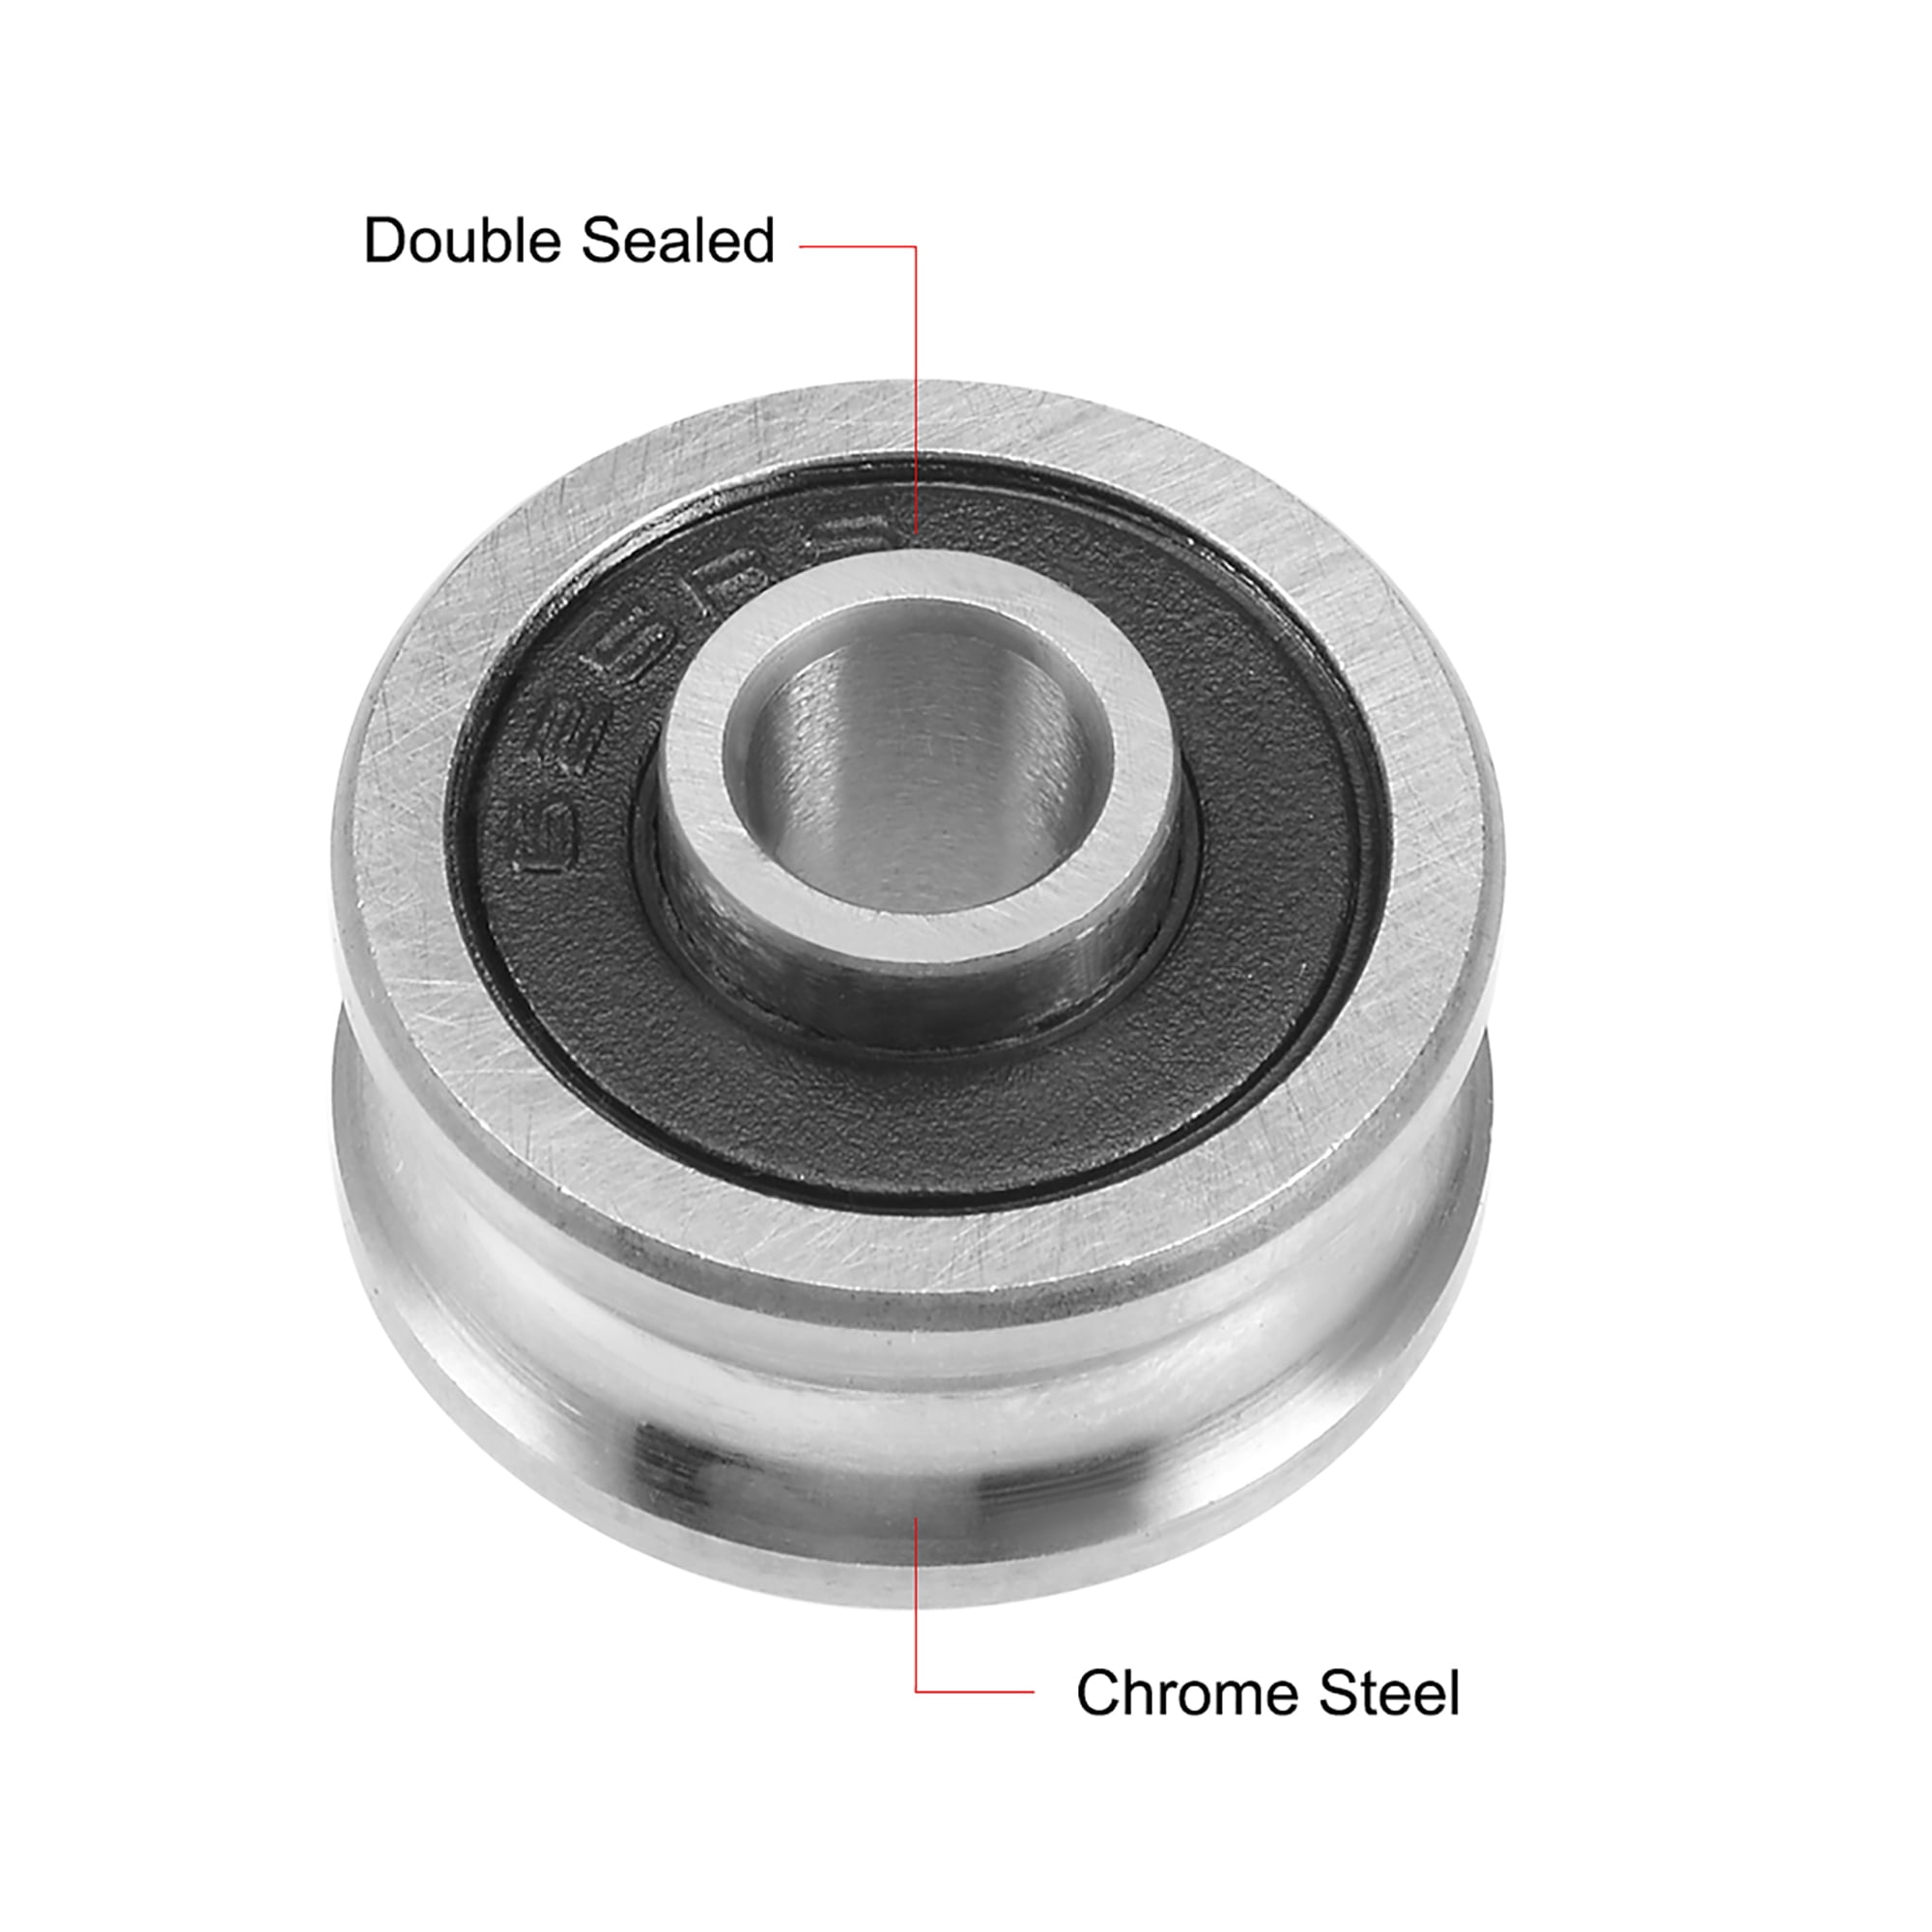 Othmro SG15 U-Groove Track Guide Bearing 5x17x8mm Pulley Wheel Bearings for Textile Machine Dual Row 